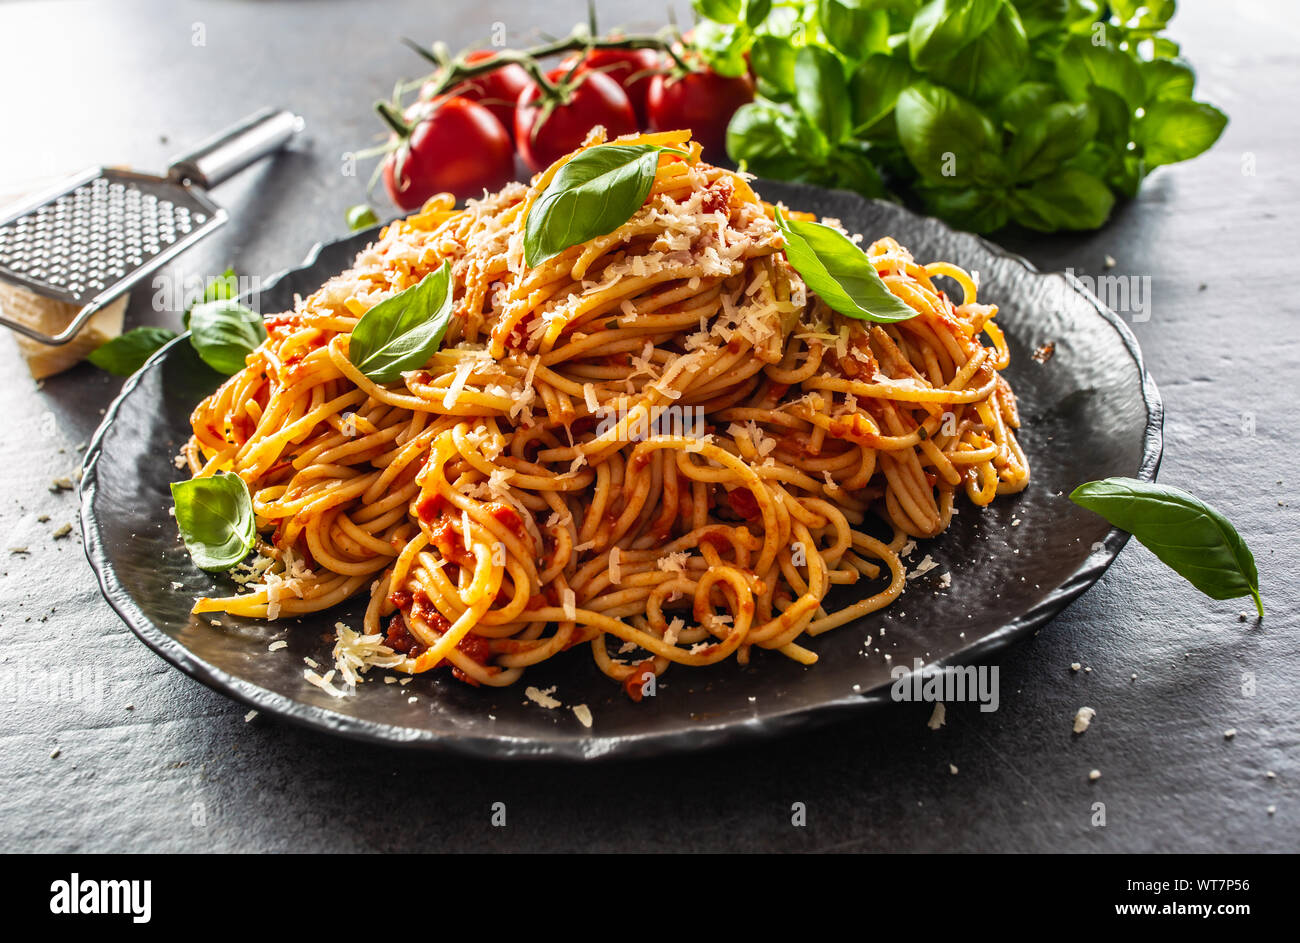 Pasta spaghetti toamto and bolognese sauce with oilve oil parmesan and basil Stock Photo